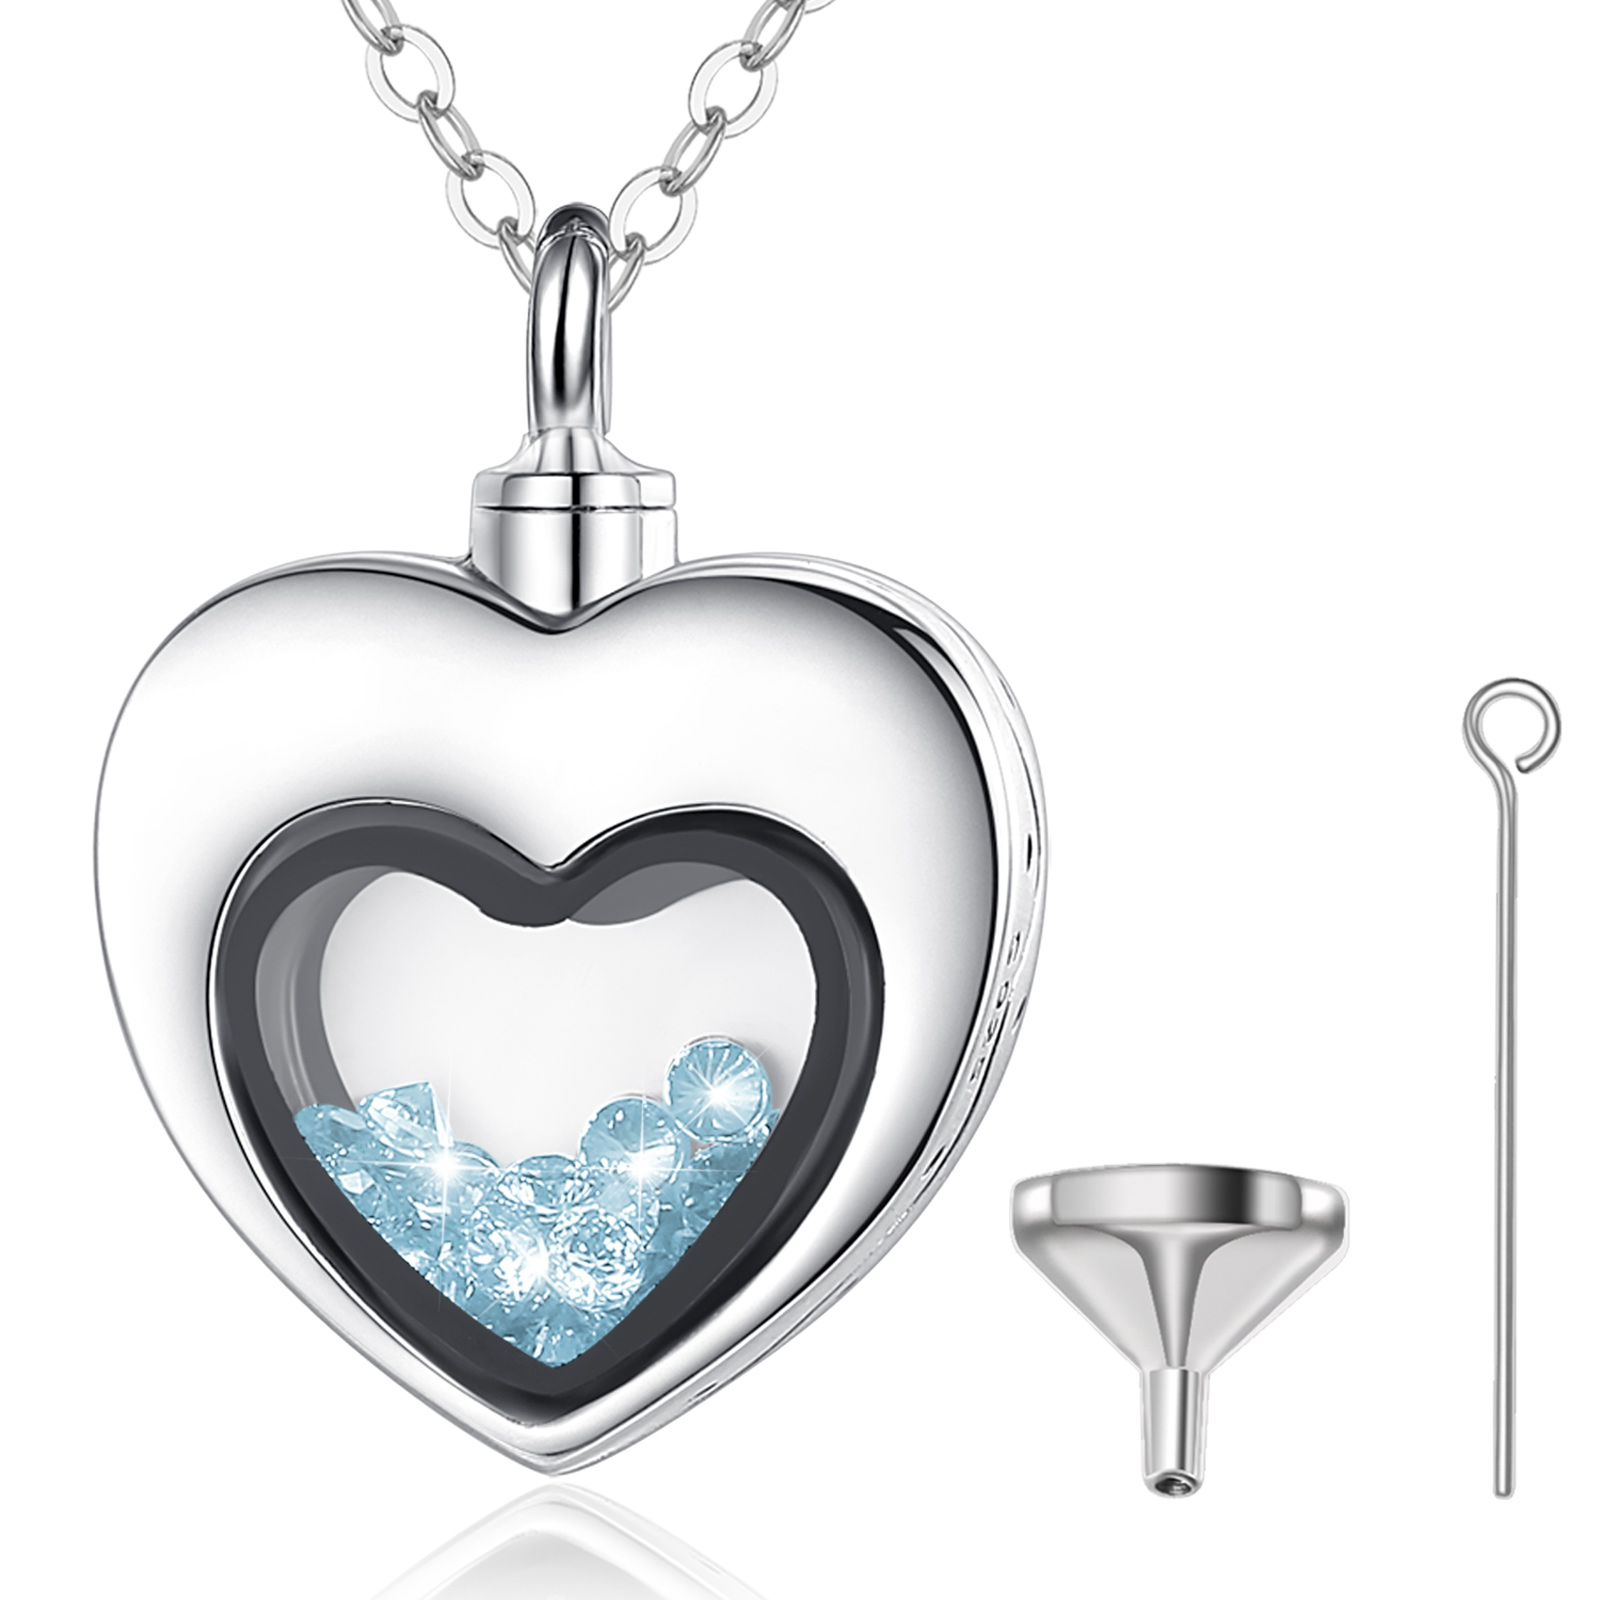 Merryshine s925 sterling silver cremation jewelry color zircon heart shaped pet urn necklaces for ashes